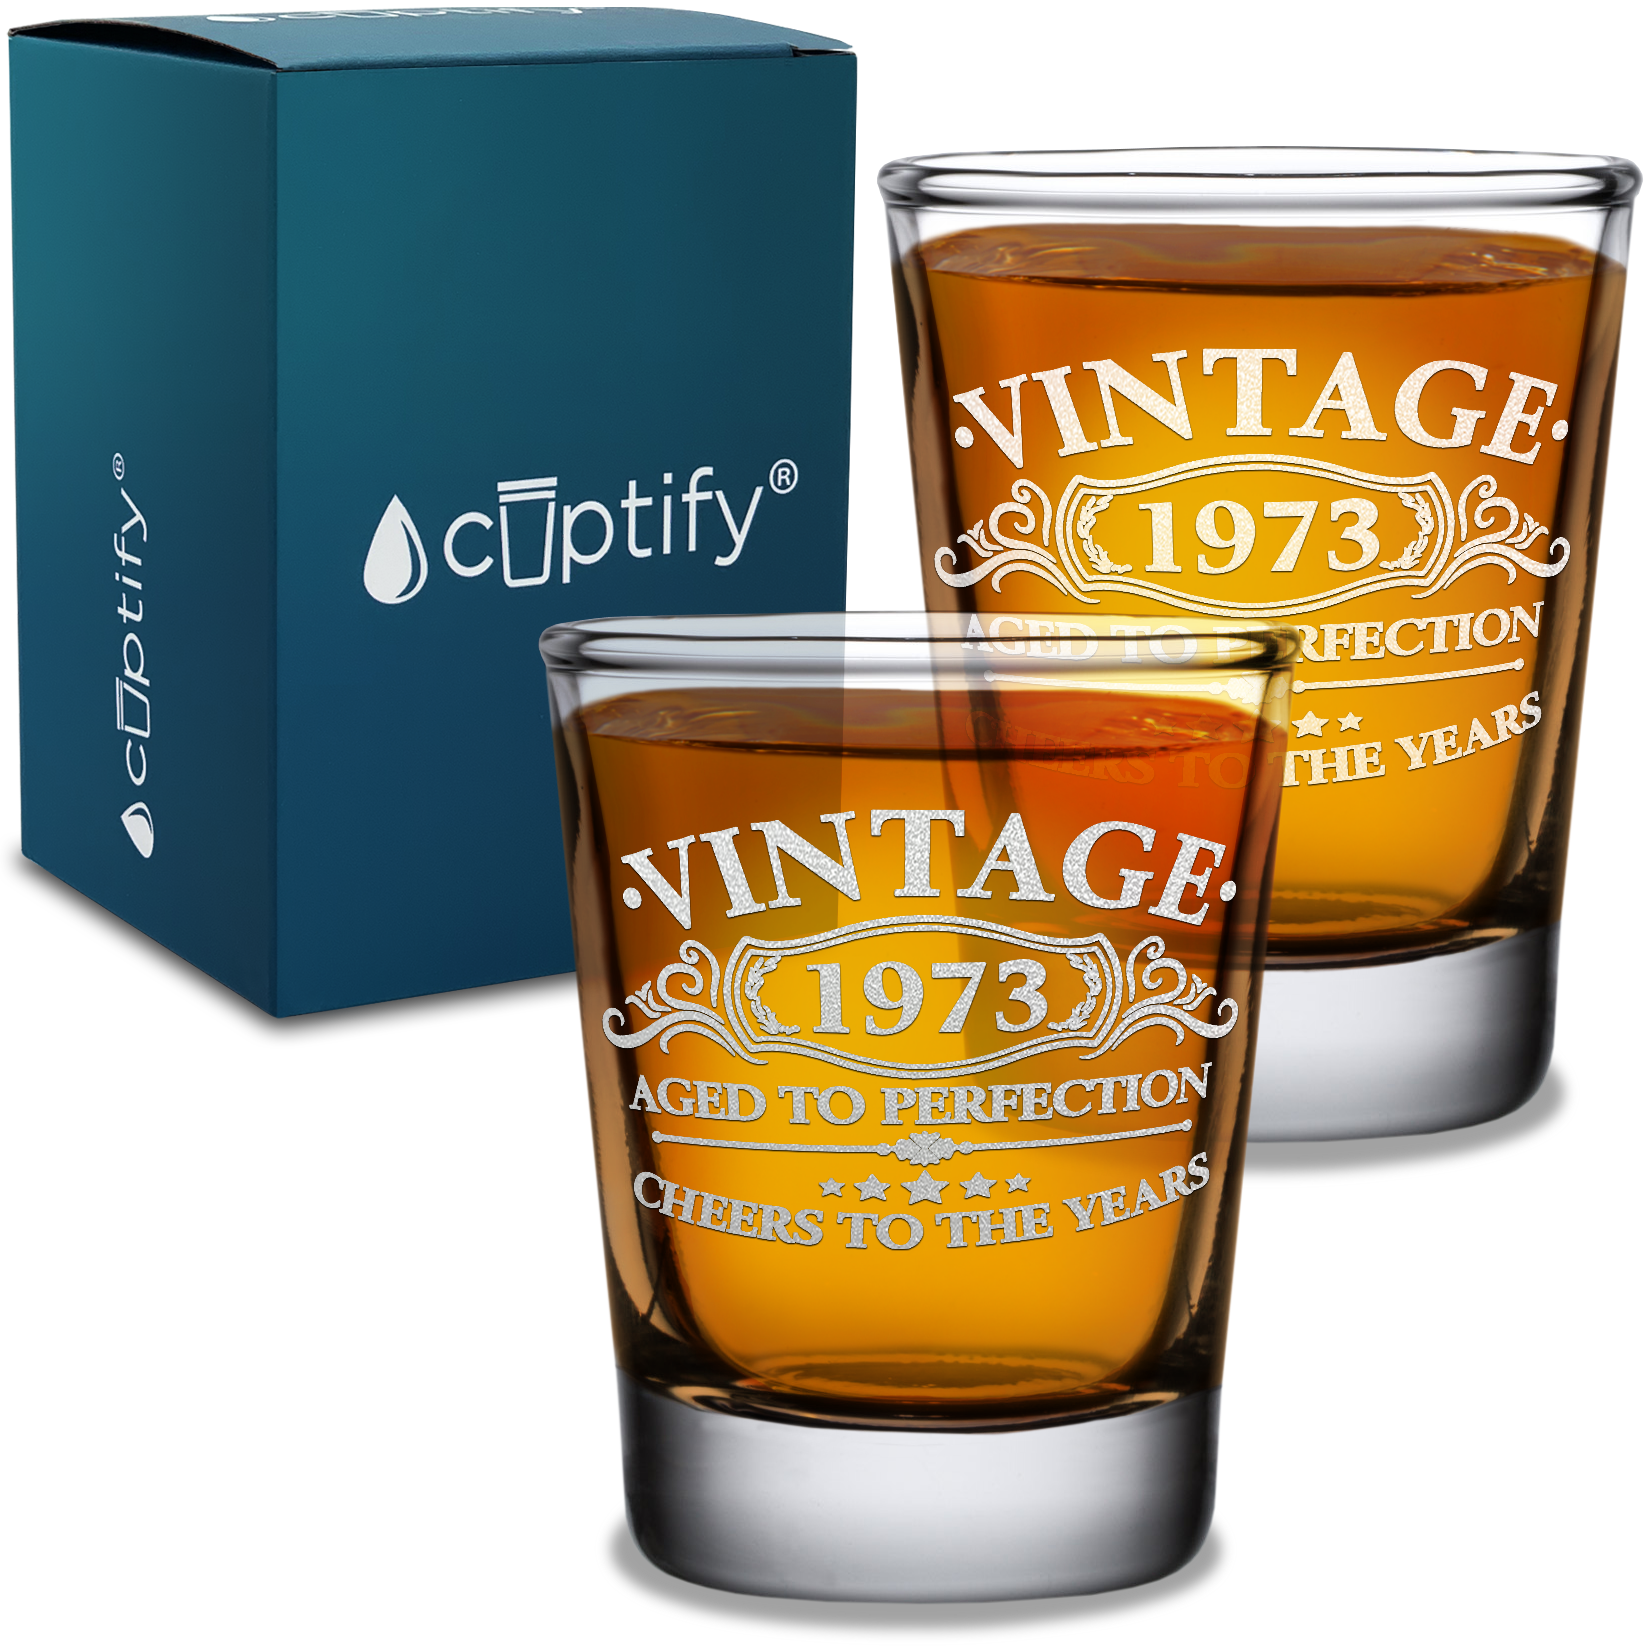 Vintage Aged To Perfection Cheers To 48 Years 1973 Laser Engraved on 2oz Shot Glasses - Set of 2